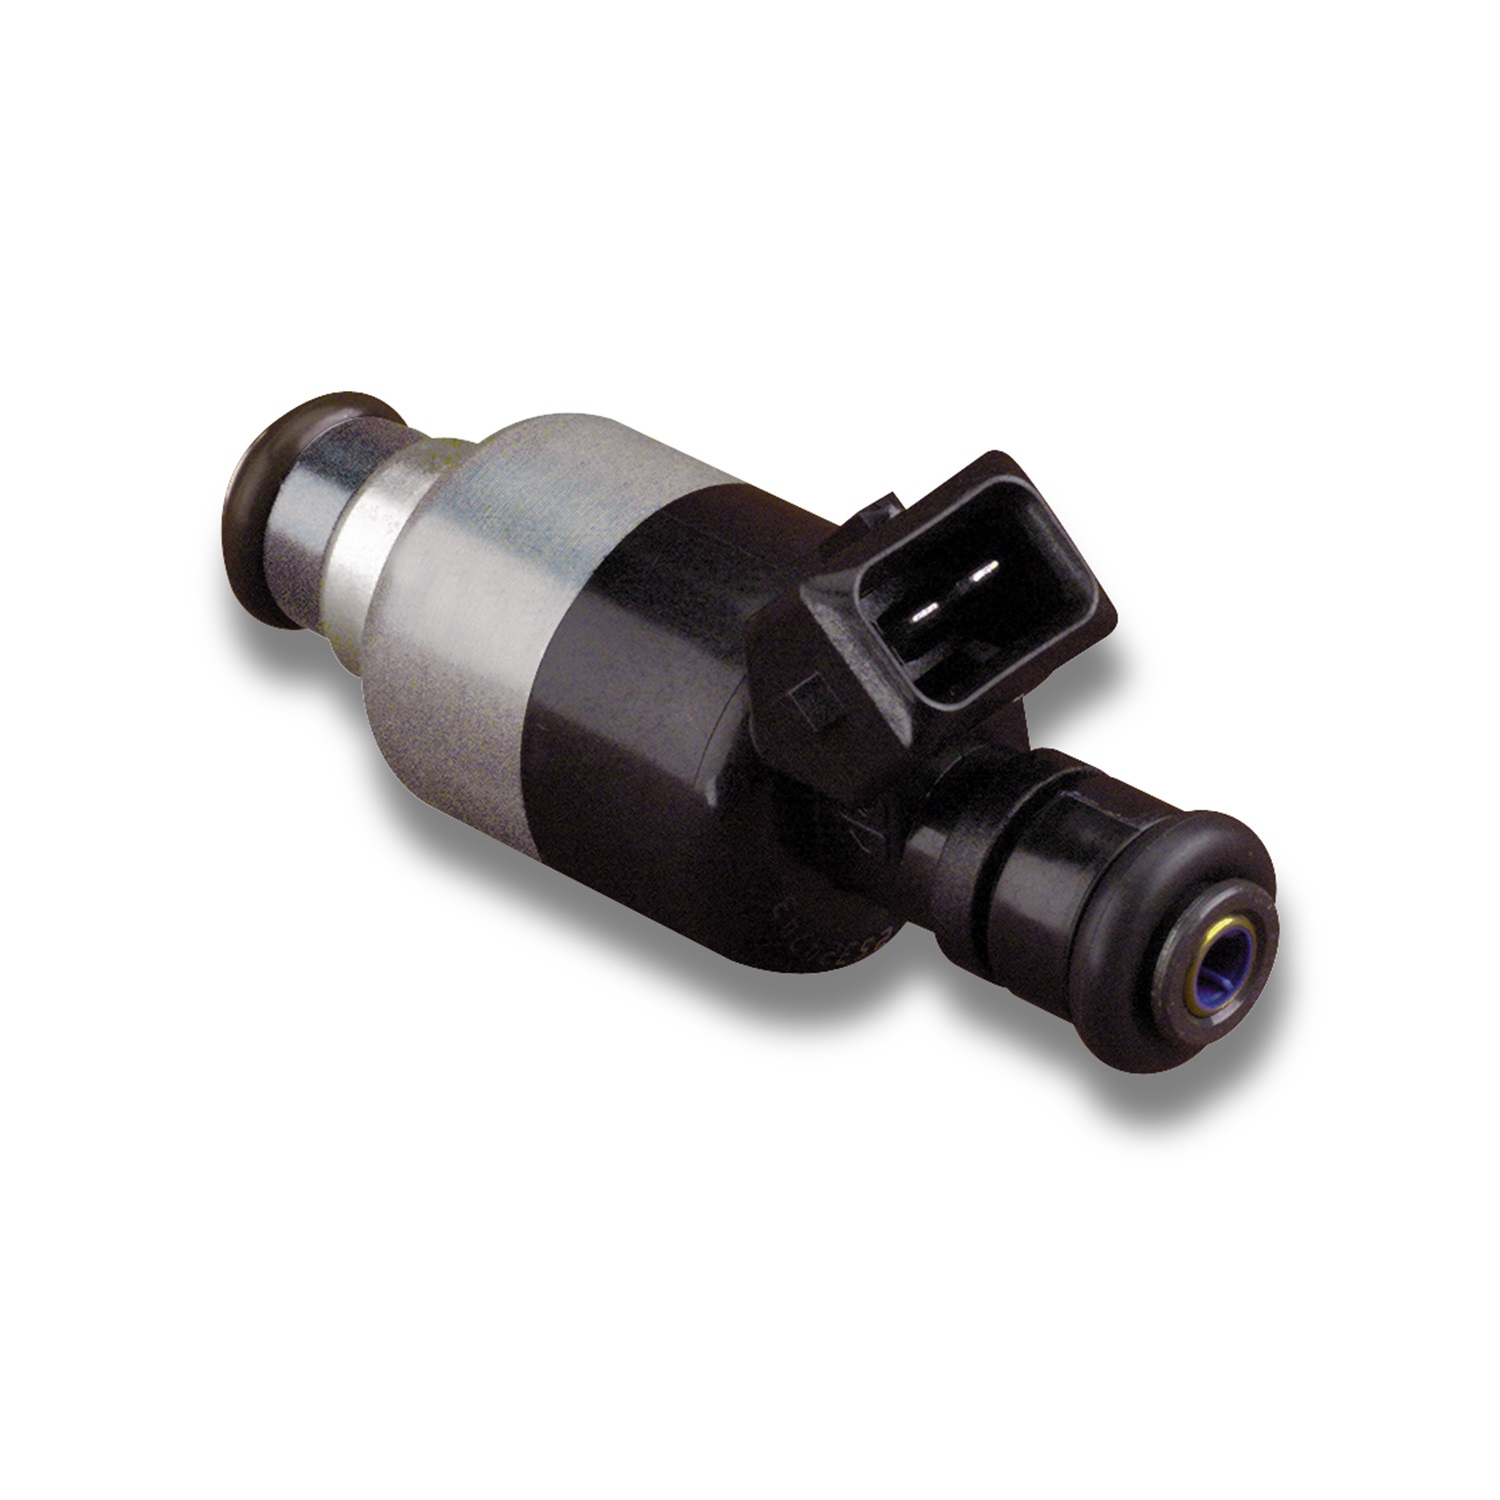 Holley Performance 522-368 Universal Fuel Injector